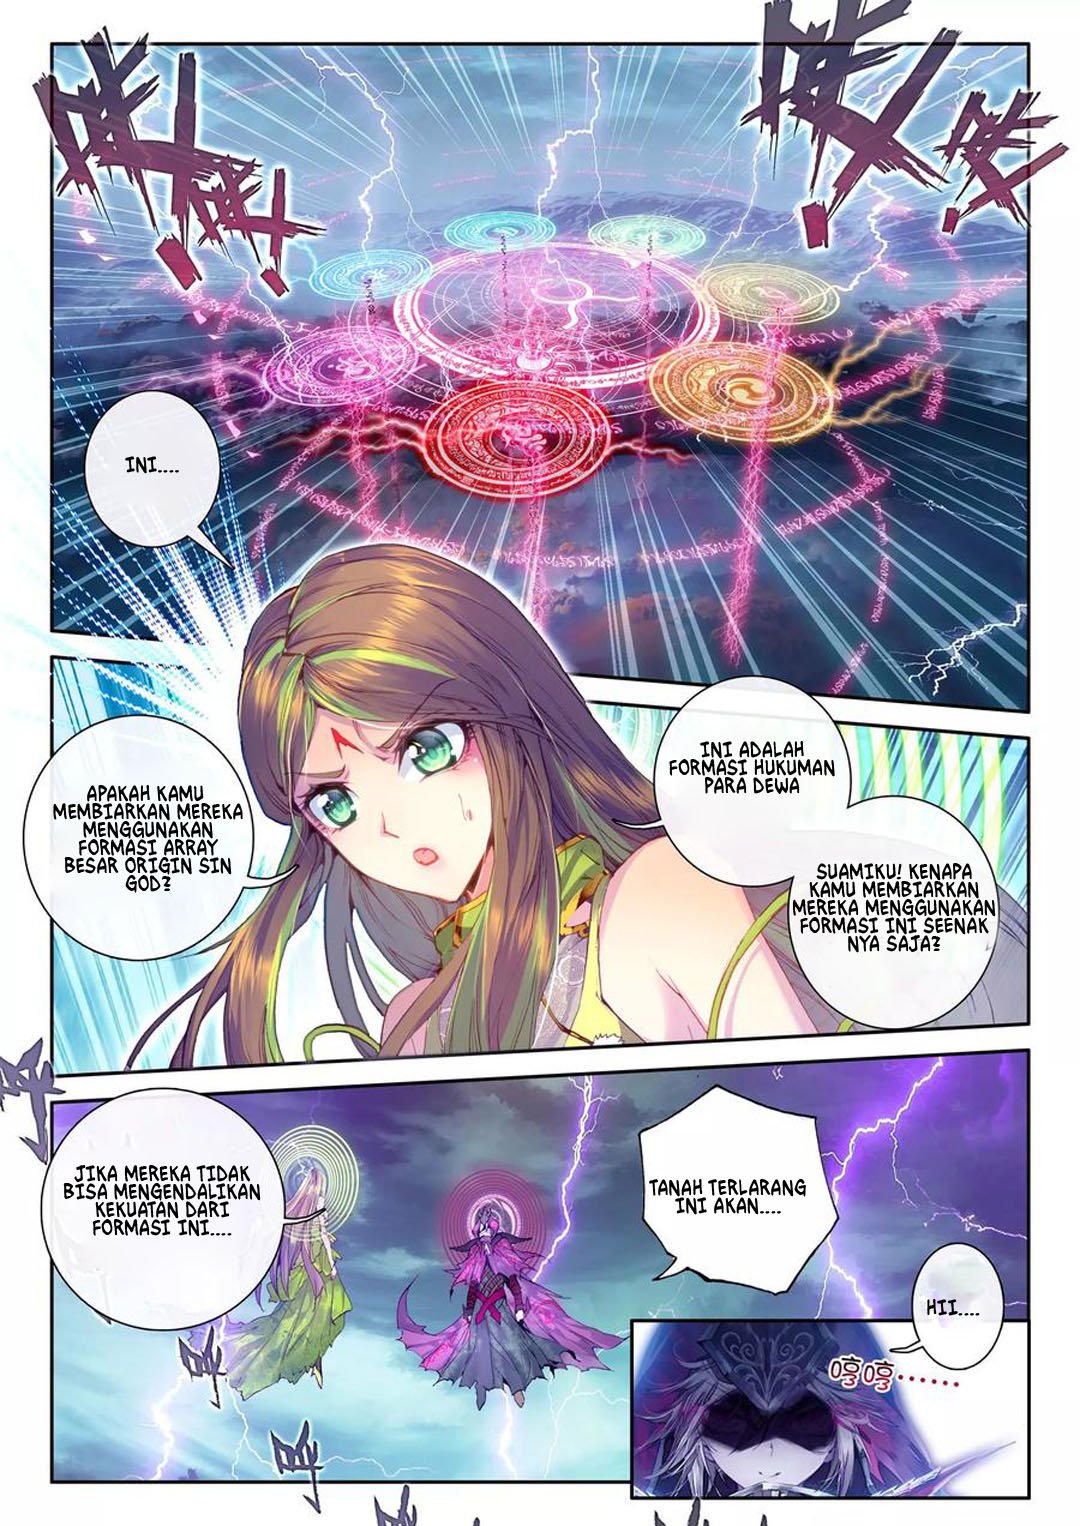 Soul Land – Legend of The Gods’ Realm Chapter 40.2